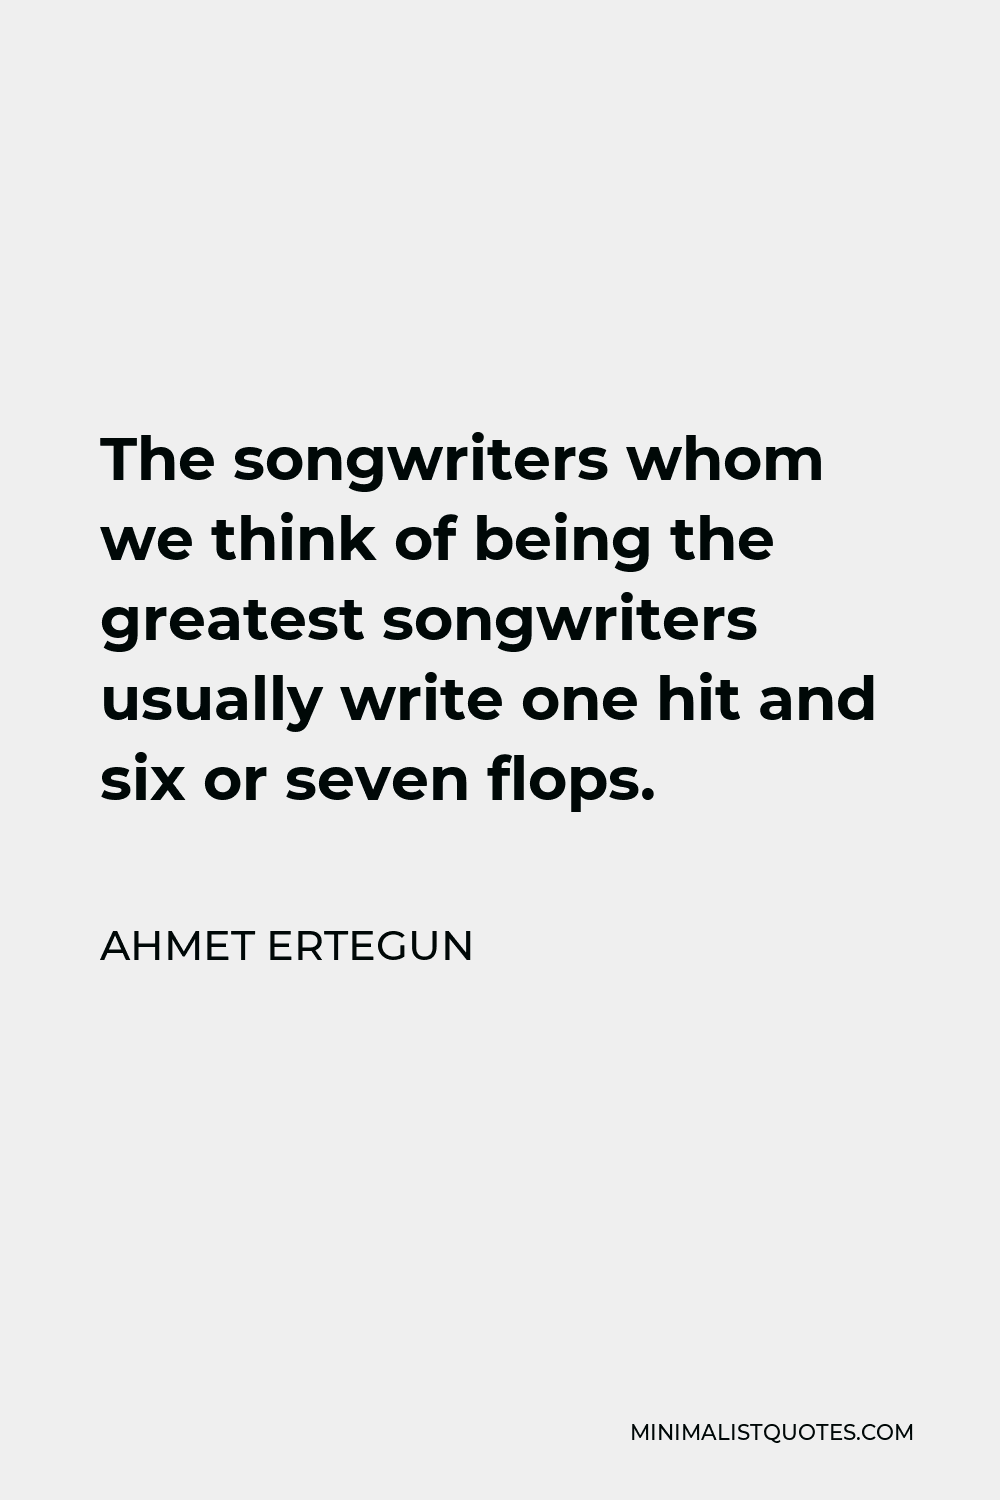 Ahmet Ertegun Quote - The songwriters whom we think of being the greatest songwriters usually write one hit and six or seven flops.